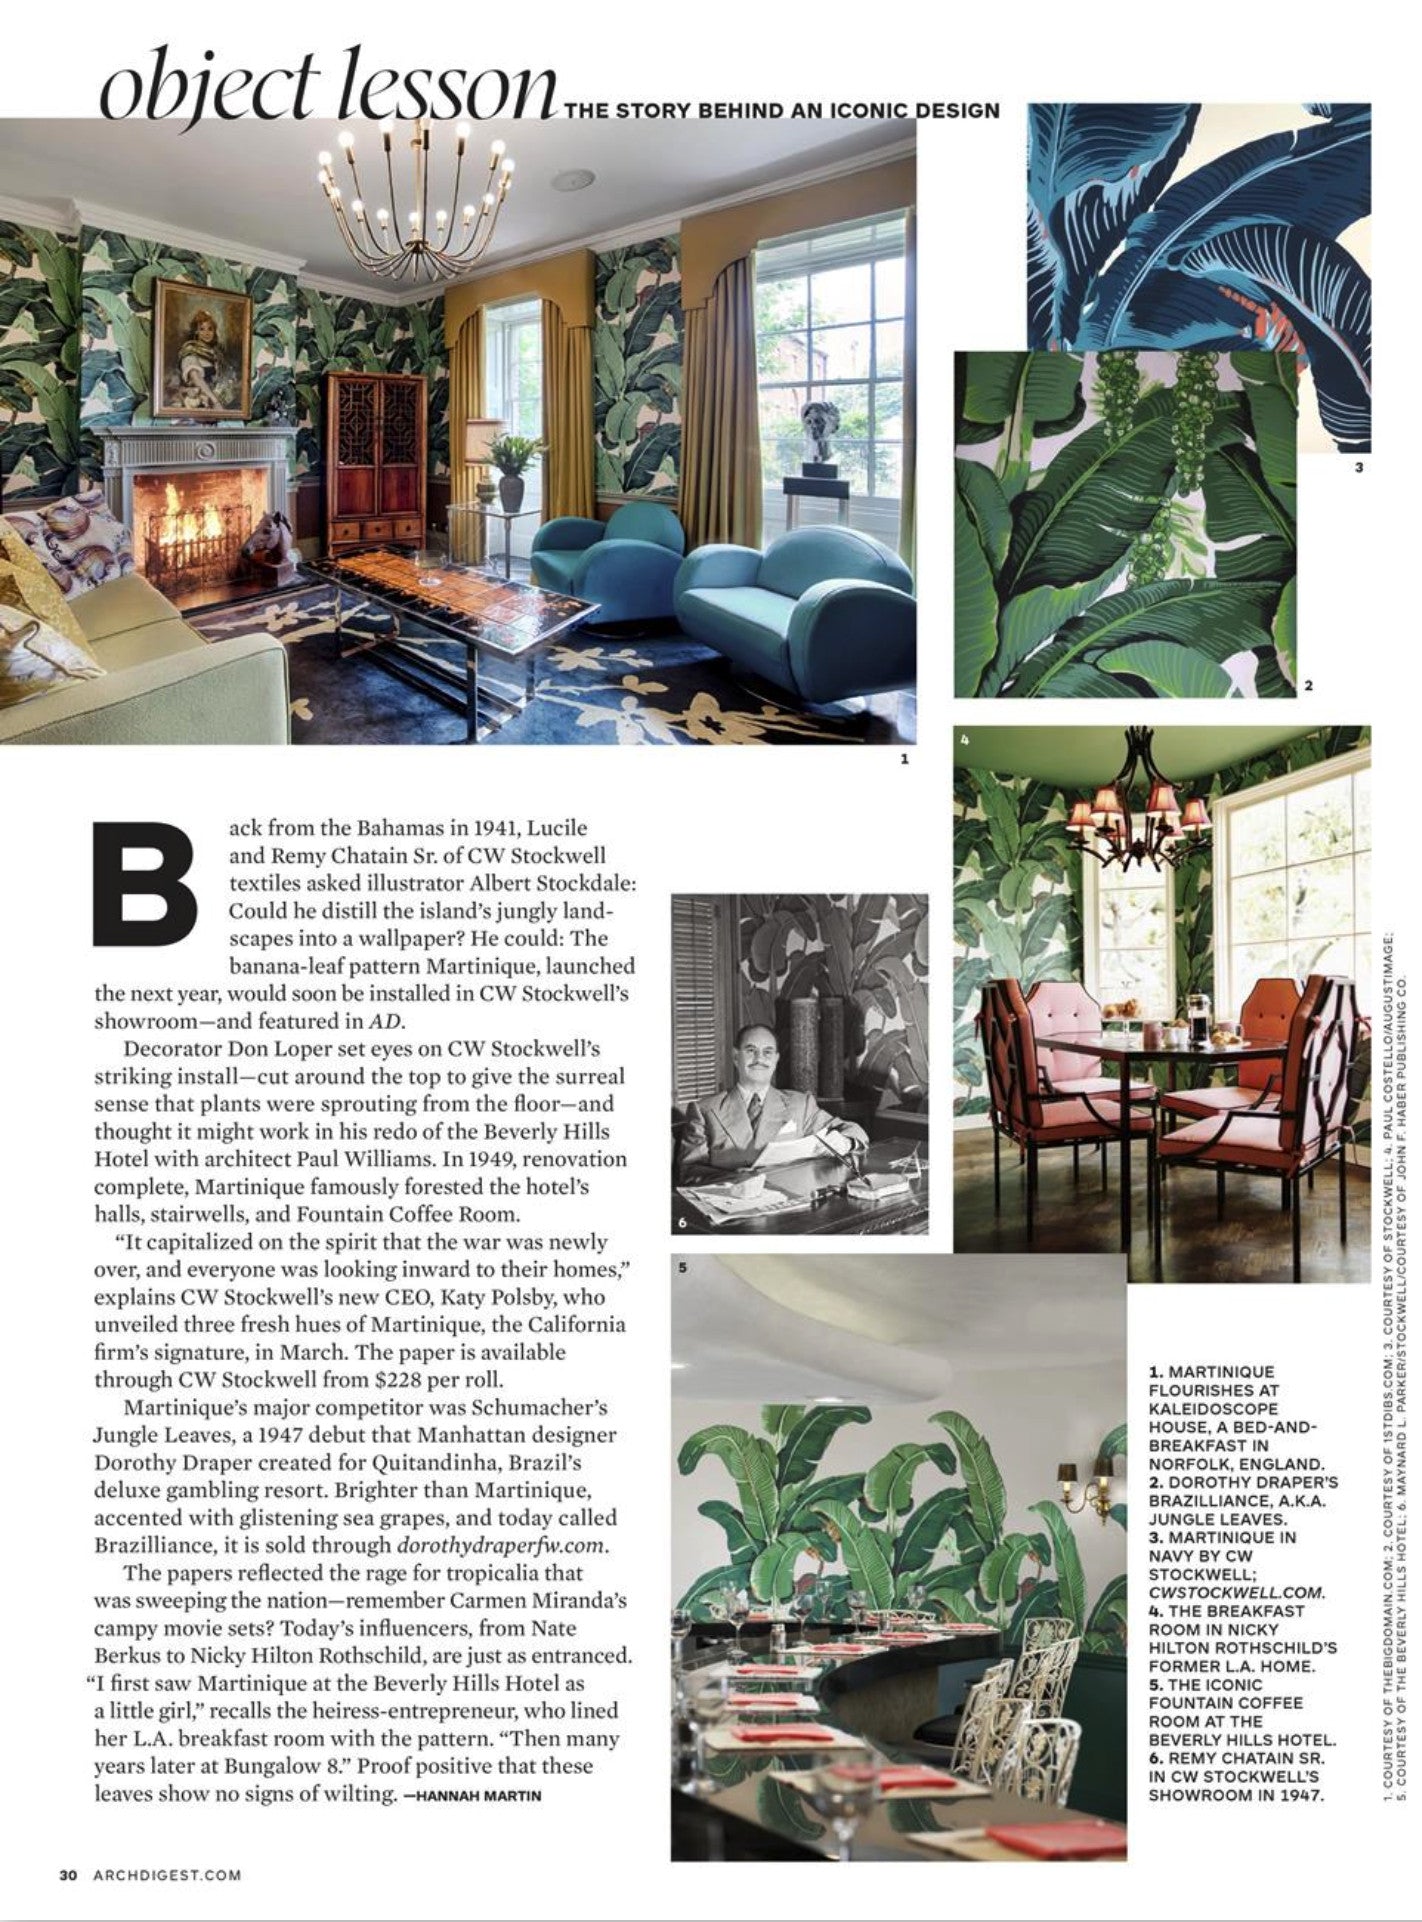 "TOP BANANA" - CW Stockwell's Martinique Wallpaper, featured in Architectural Digest's April 2019 Issue, in the "Object Lesson" column by Hannah Martin.